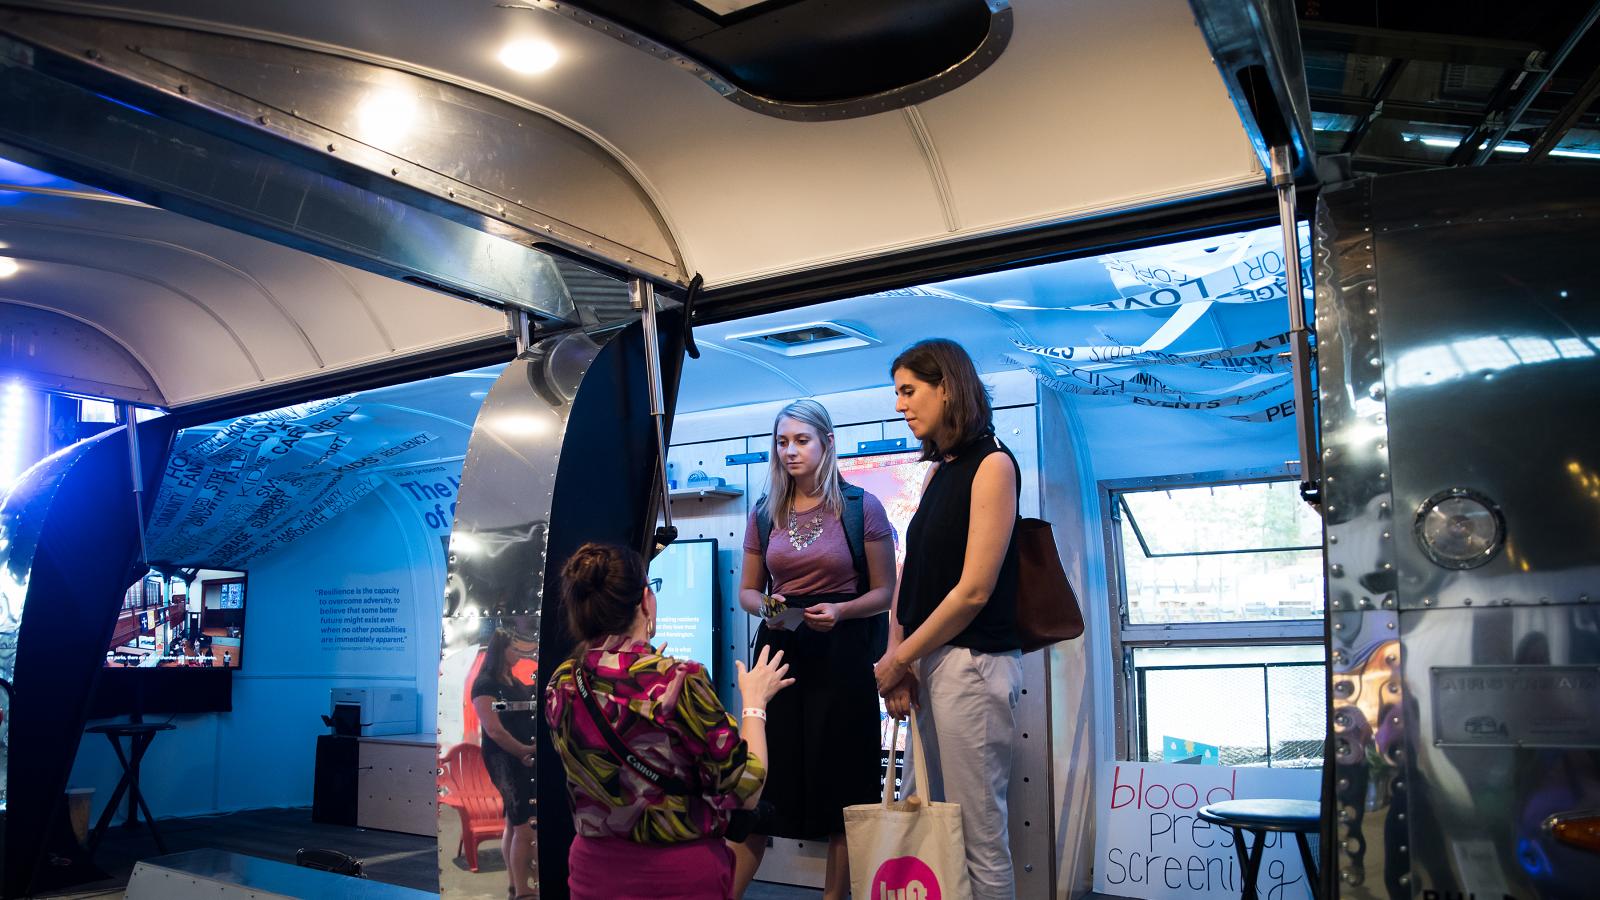 People explore a design exhibit housed in an Airstream trailer